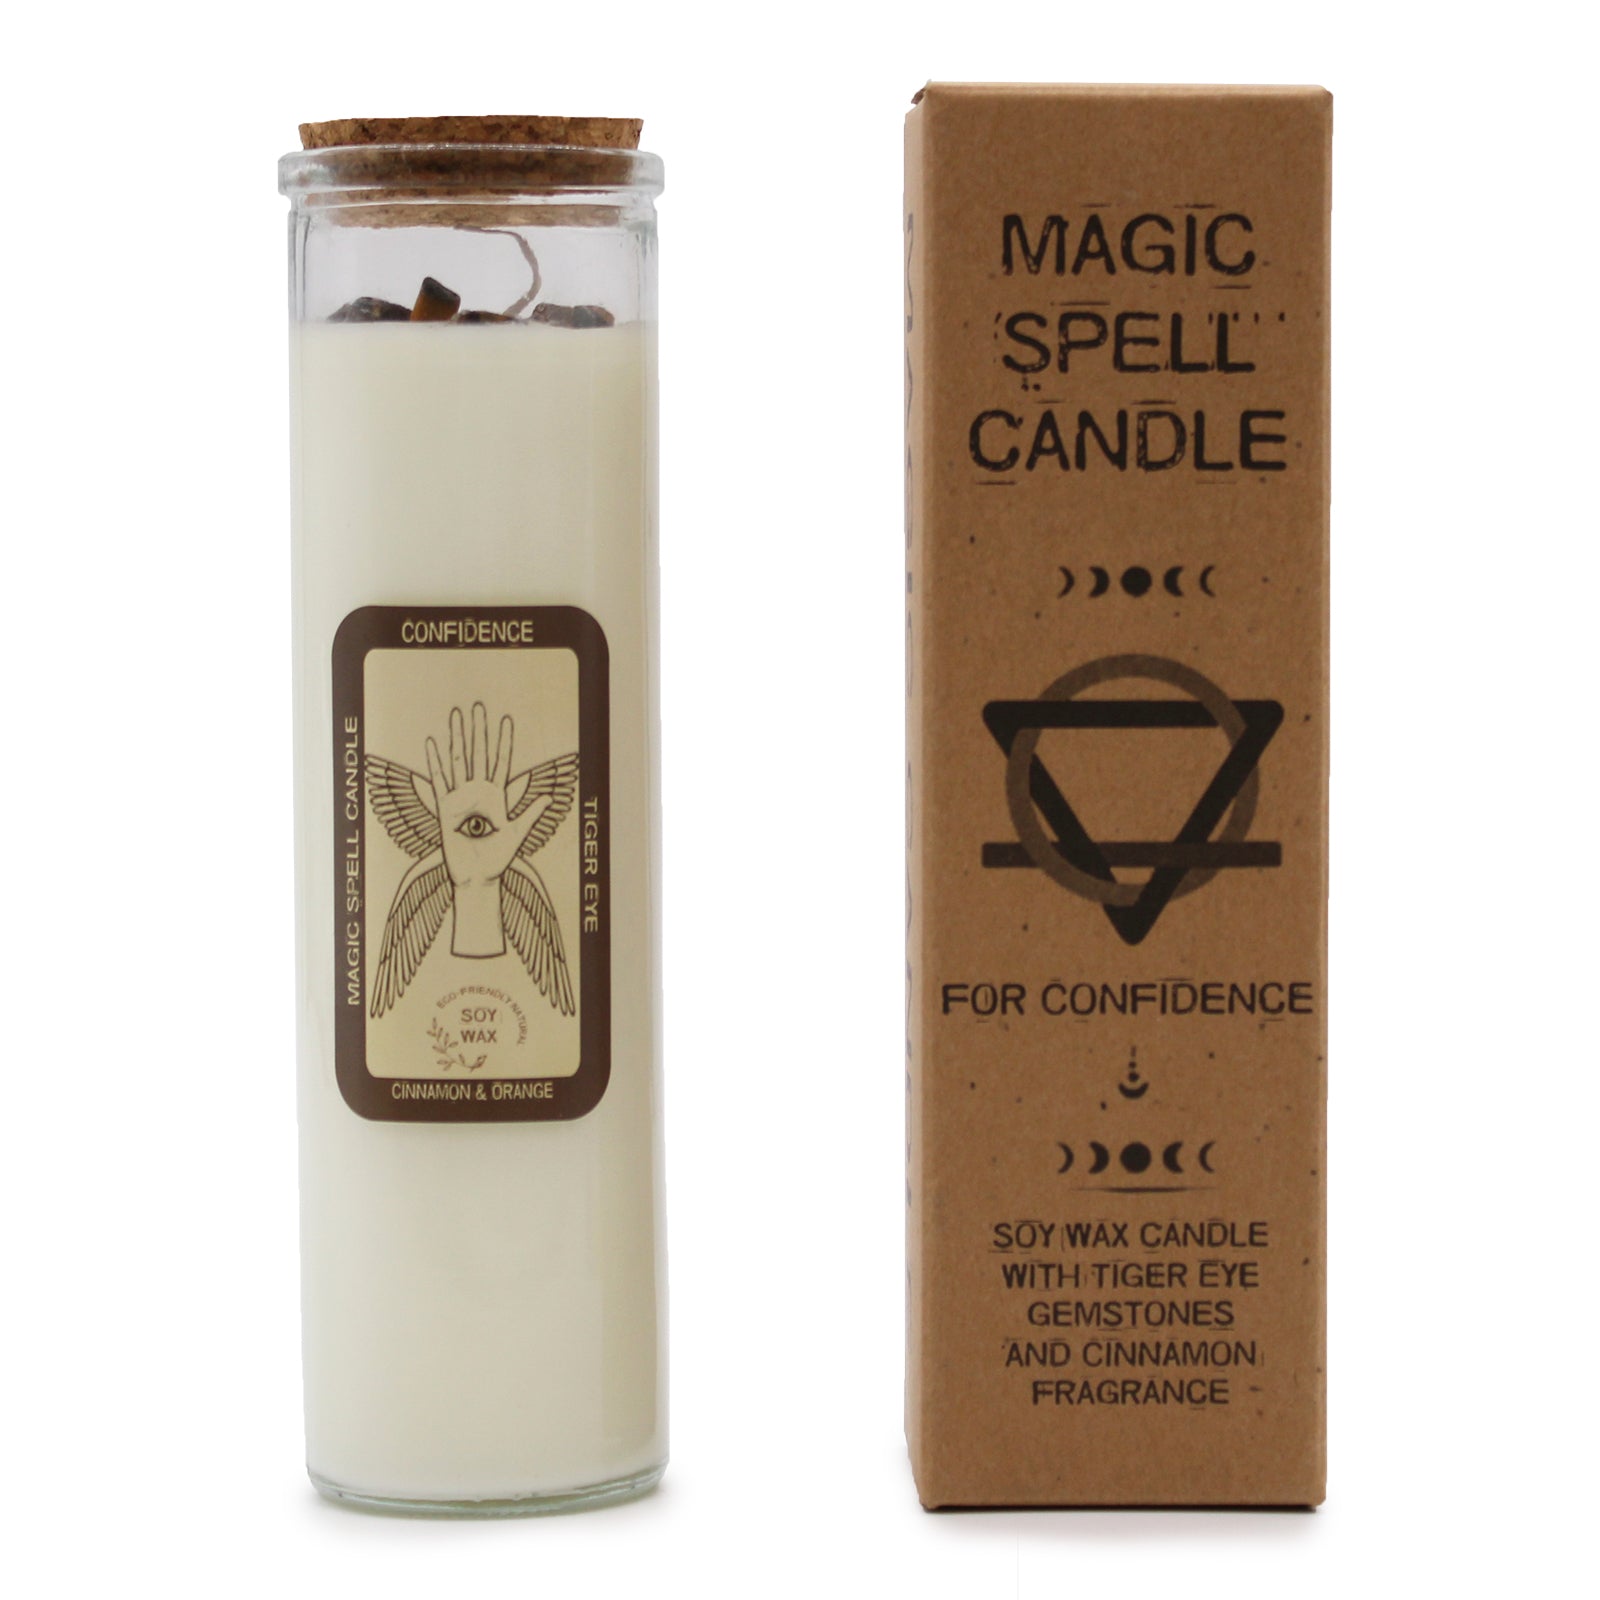 Magic Spell Candle - Confidence - Tiger Eye and Cinnamon & Orange